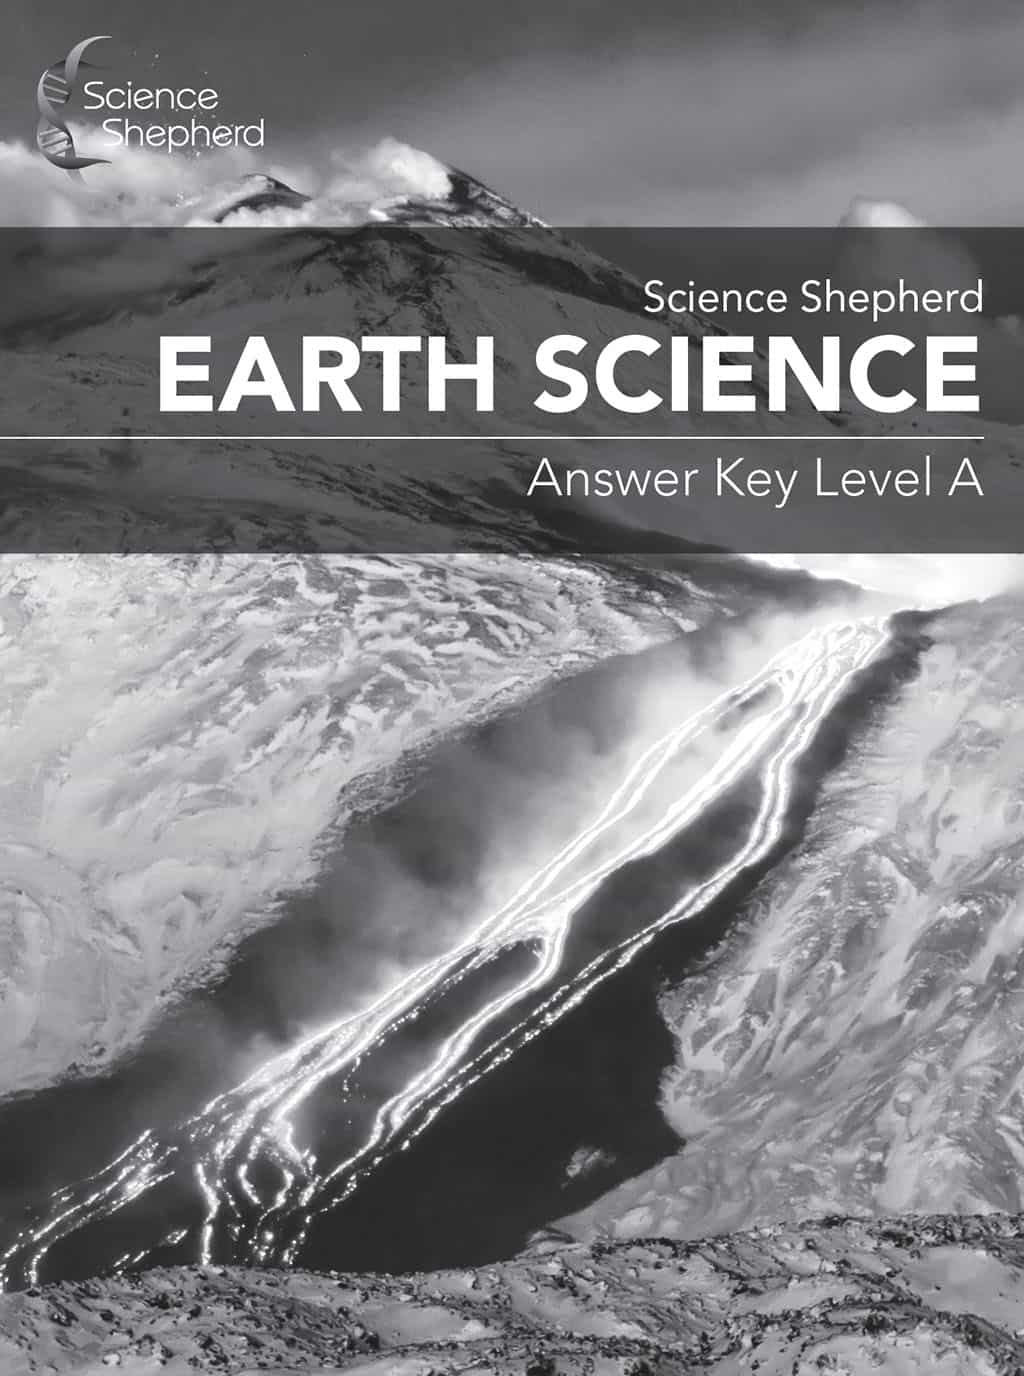 Elementary Earth Science curriculum Answer Key Level A book cover of volcano in grayscale